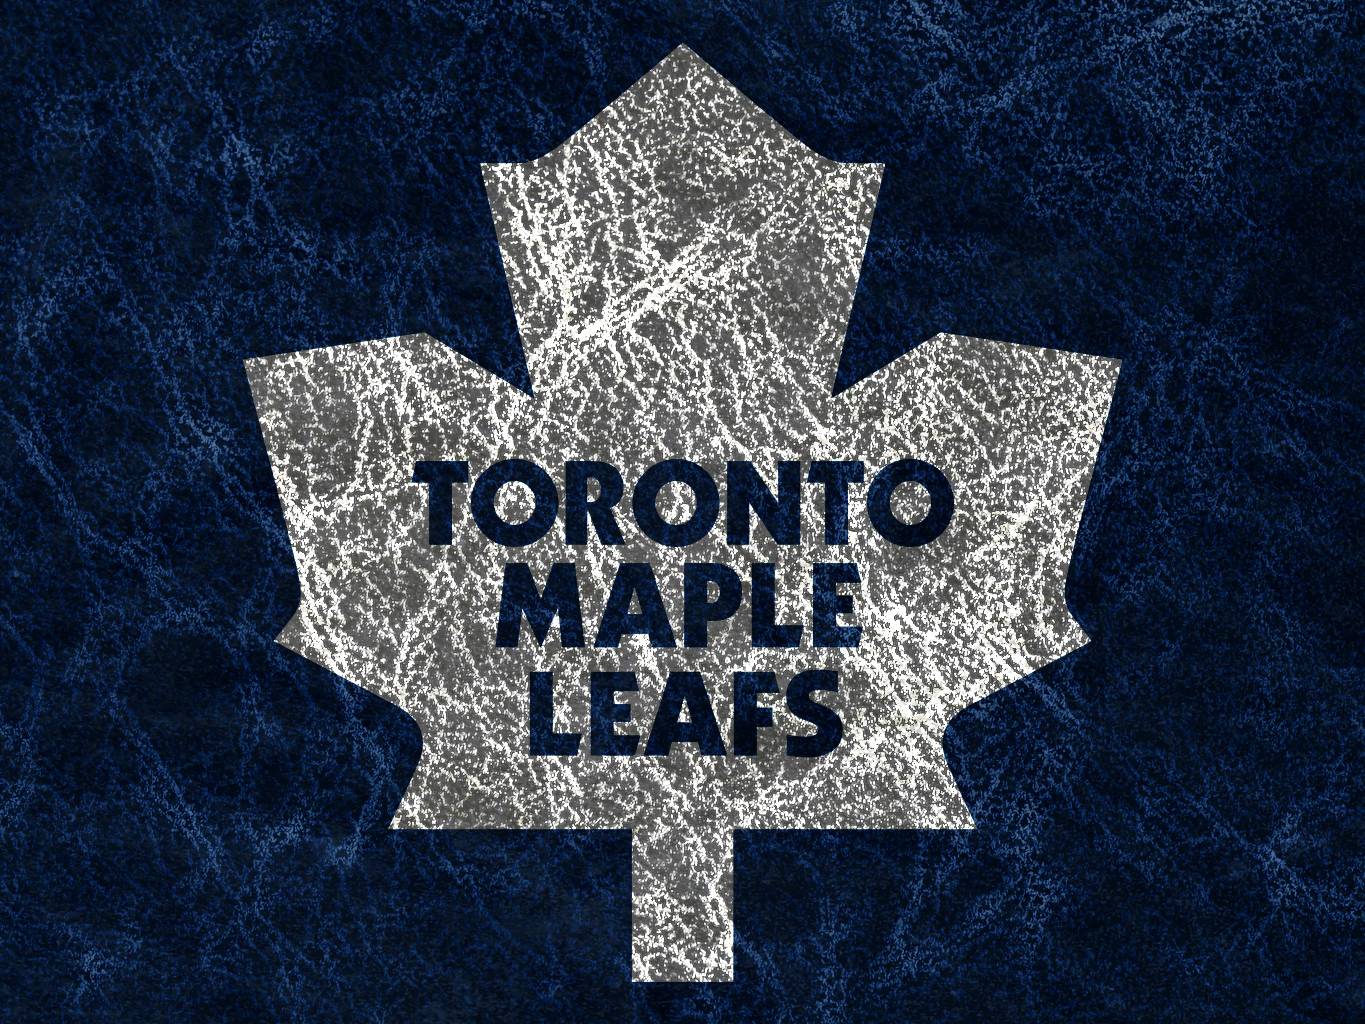 Toronto Maple Leafs Wallpaper And Background Image